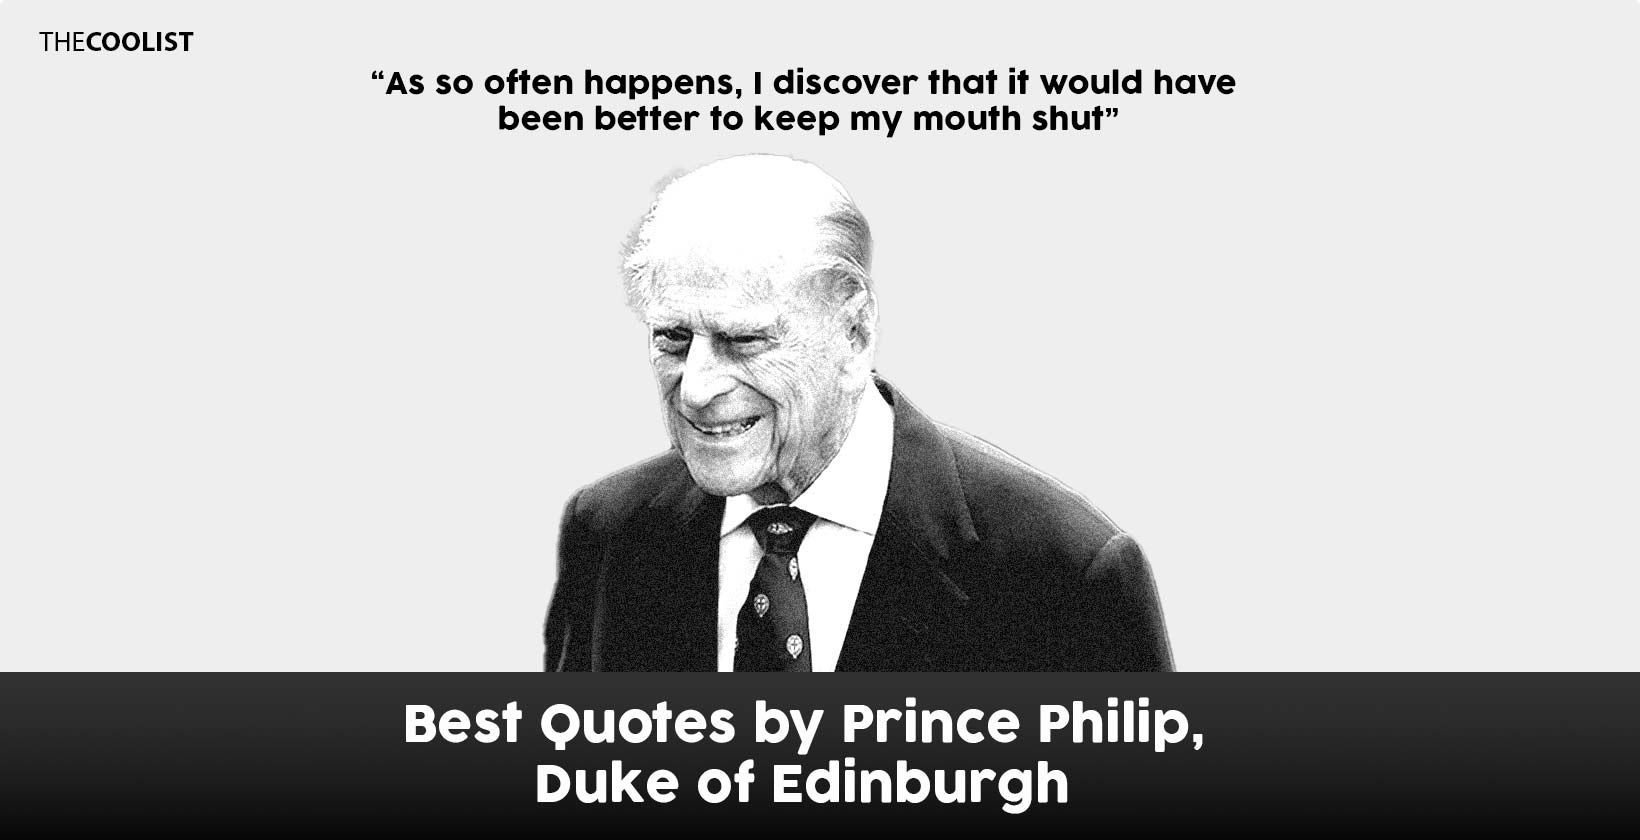 Funny, Irreverent, and Ghastly Quotes by Prince Philip, Duke of Edinburgh